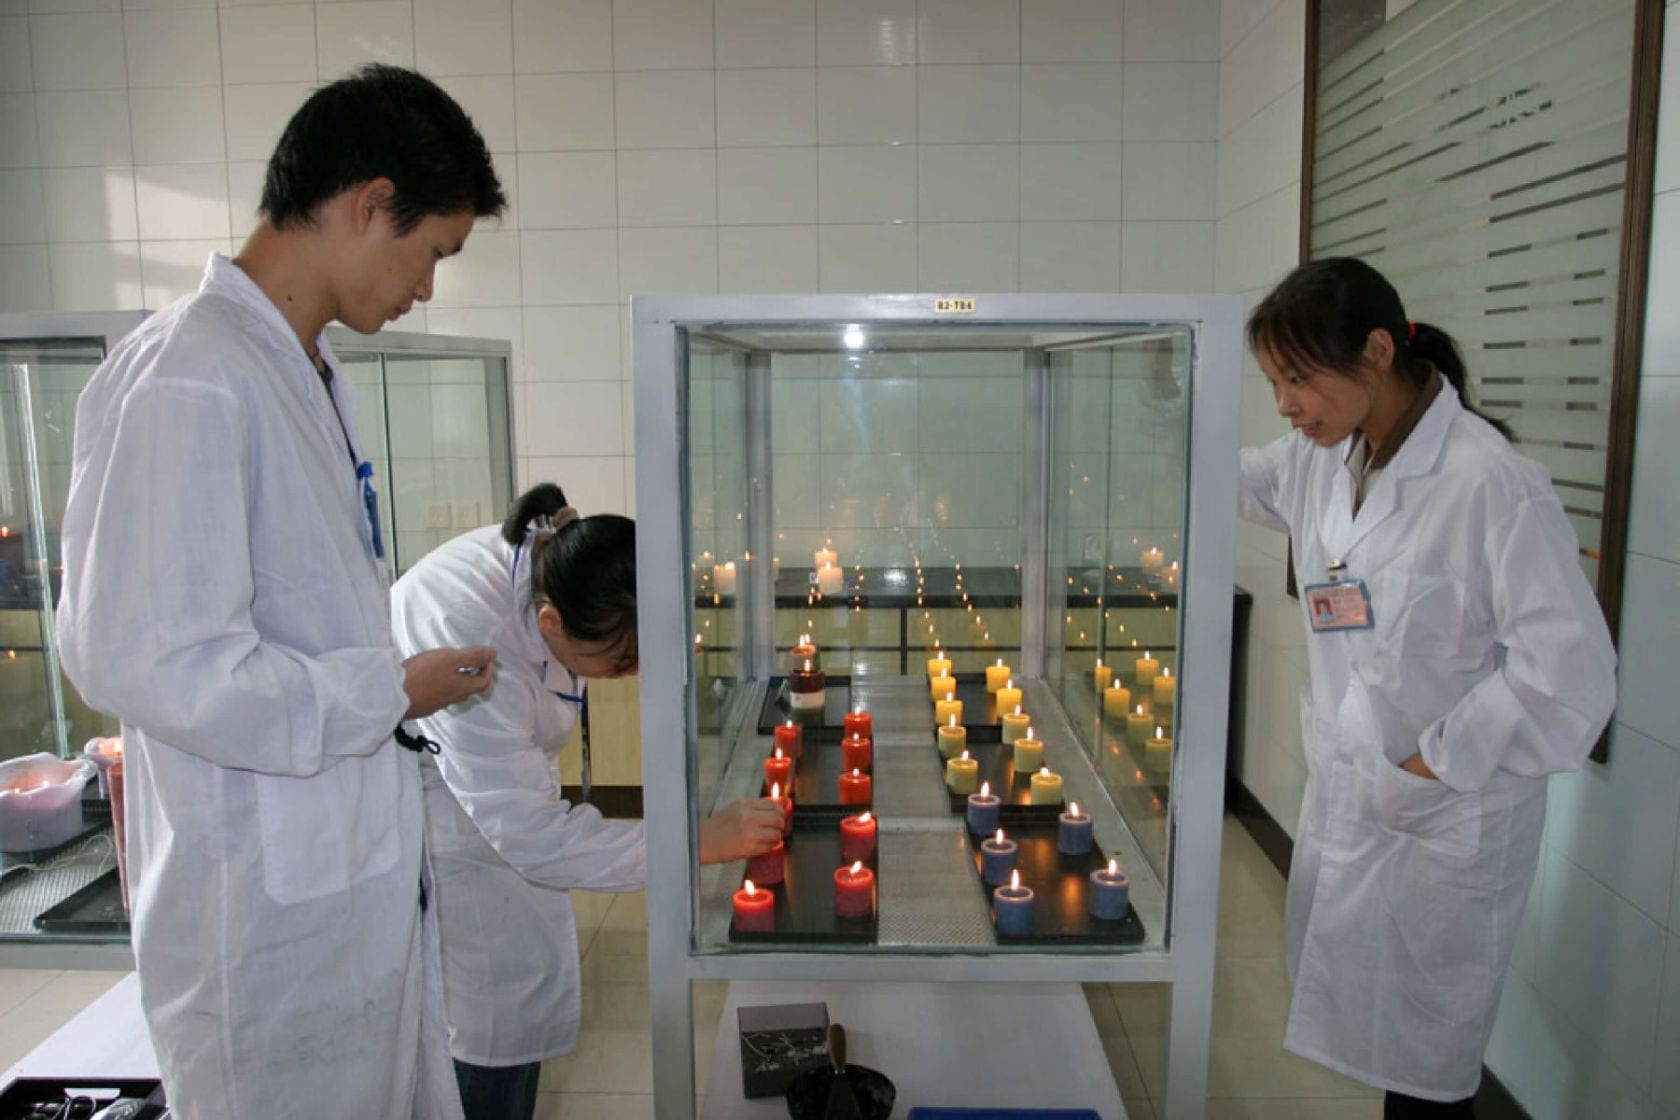 Engineers monitoring the burn lab at the Chinese factory (2004).Engineers monitoring the burn lab at the Chinese factory (2004).Engineers monitoring the burn lab at the Chinese factory (2004).